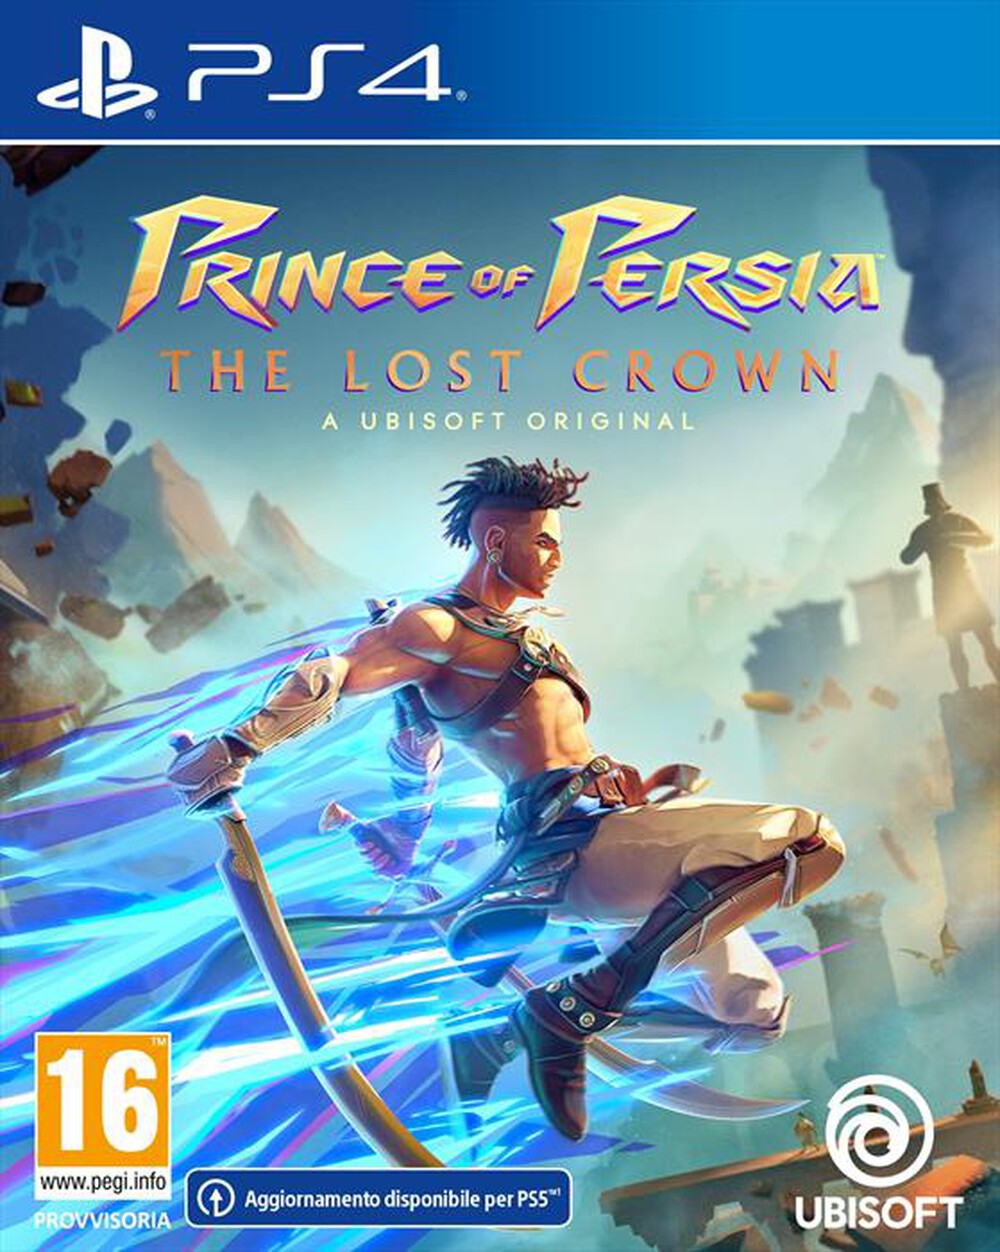 "UBISOFT - PRINCE OF PERSIA: THE LOST CROWN PS4"